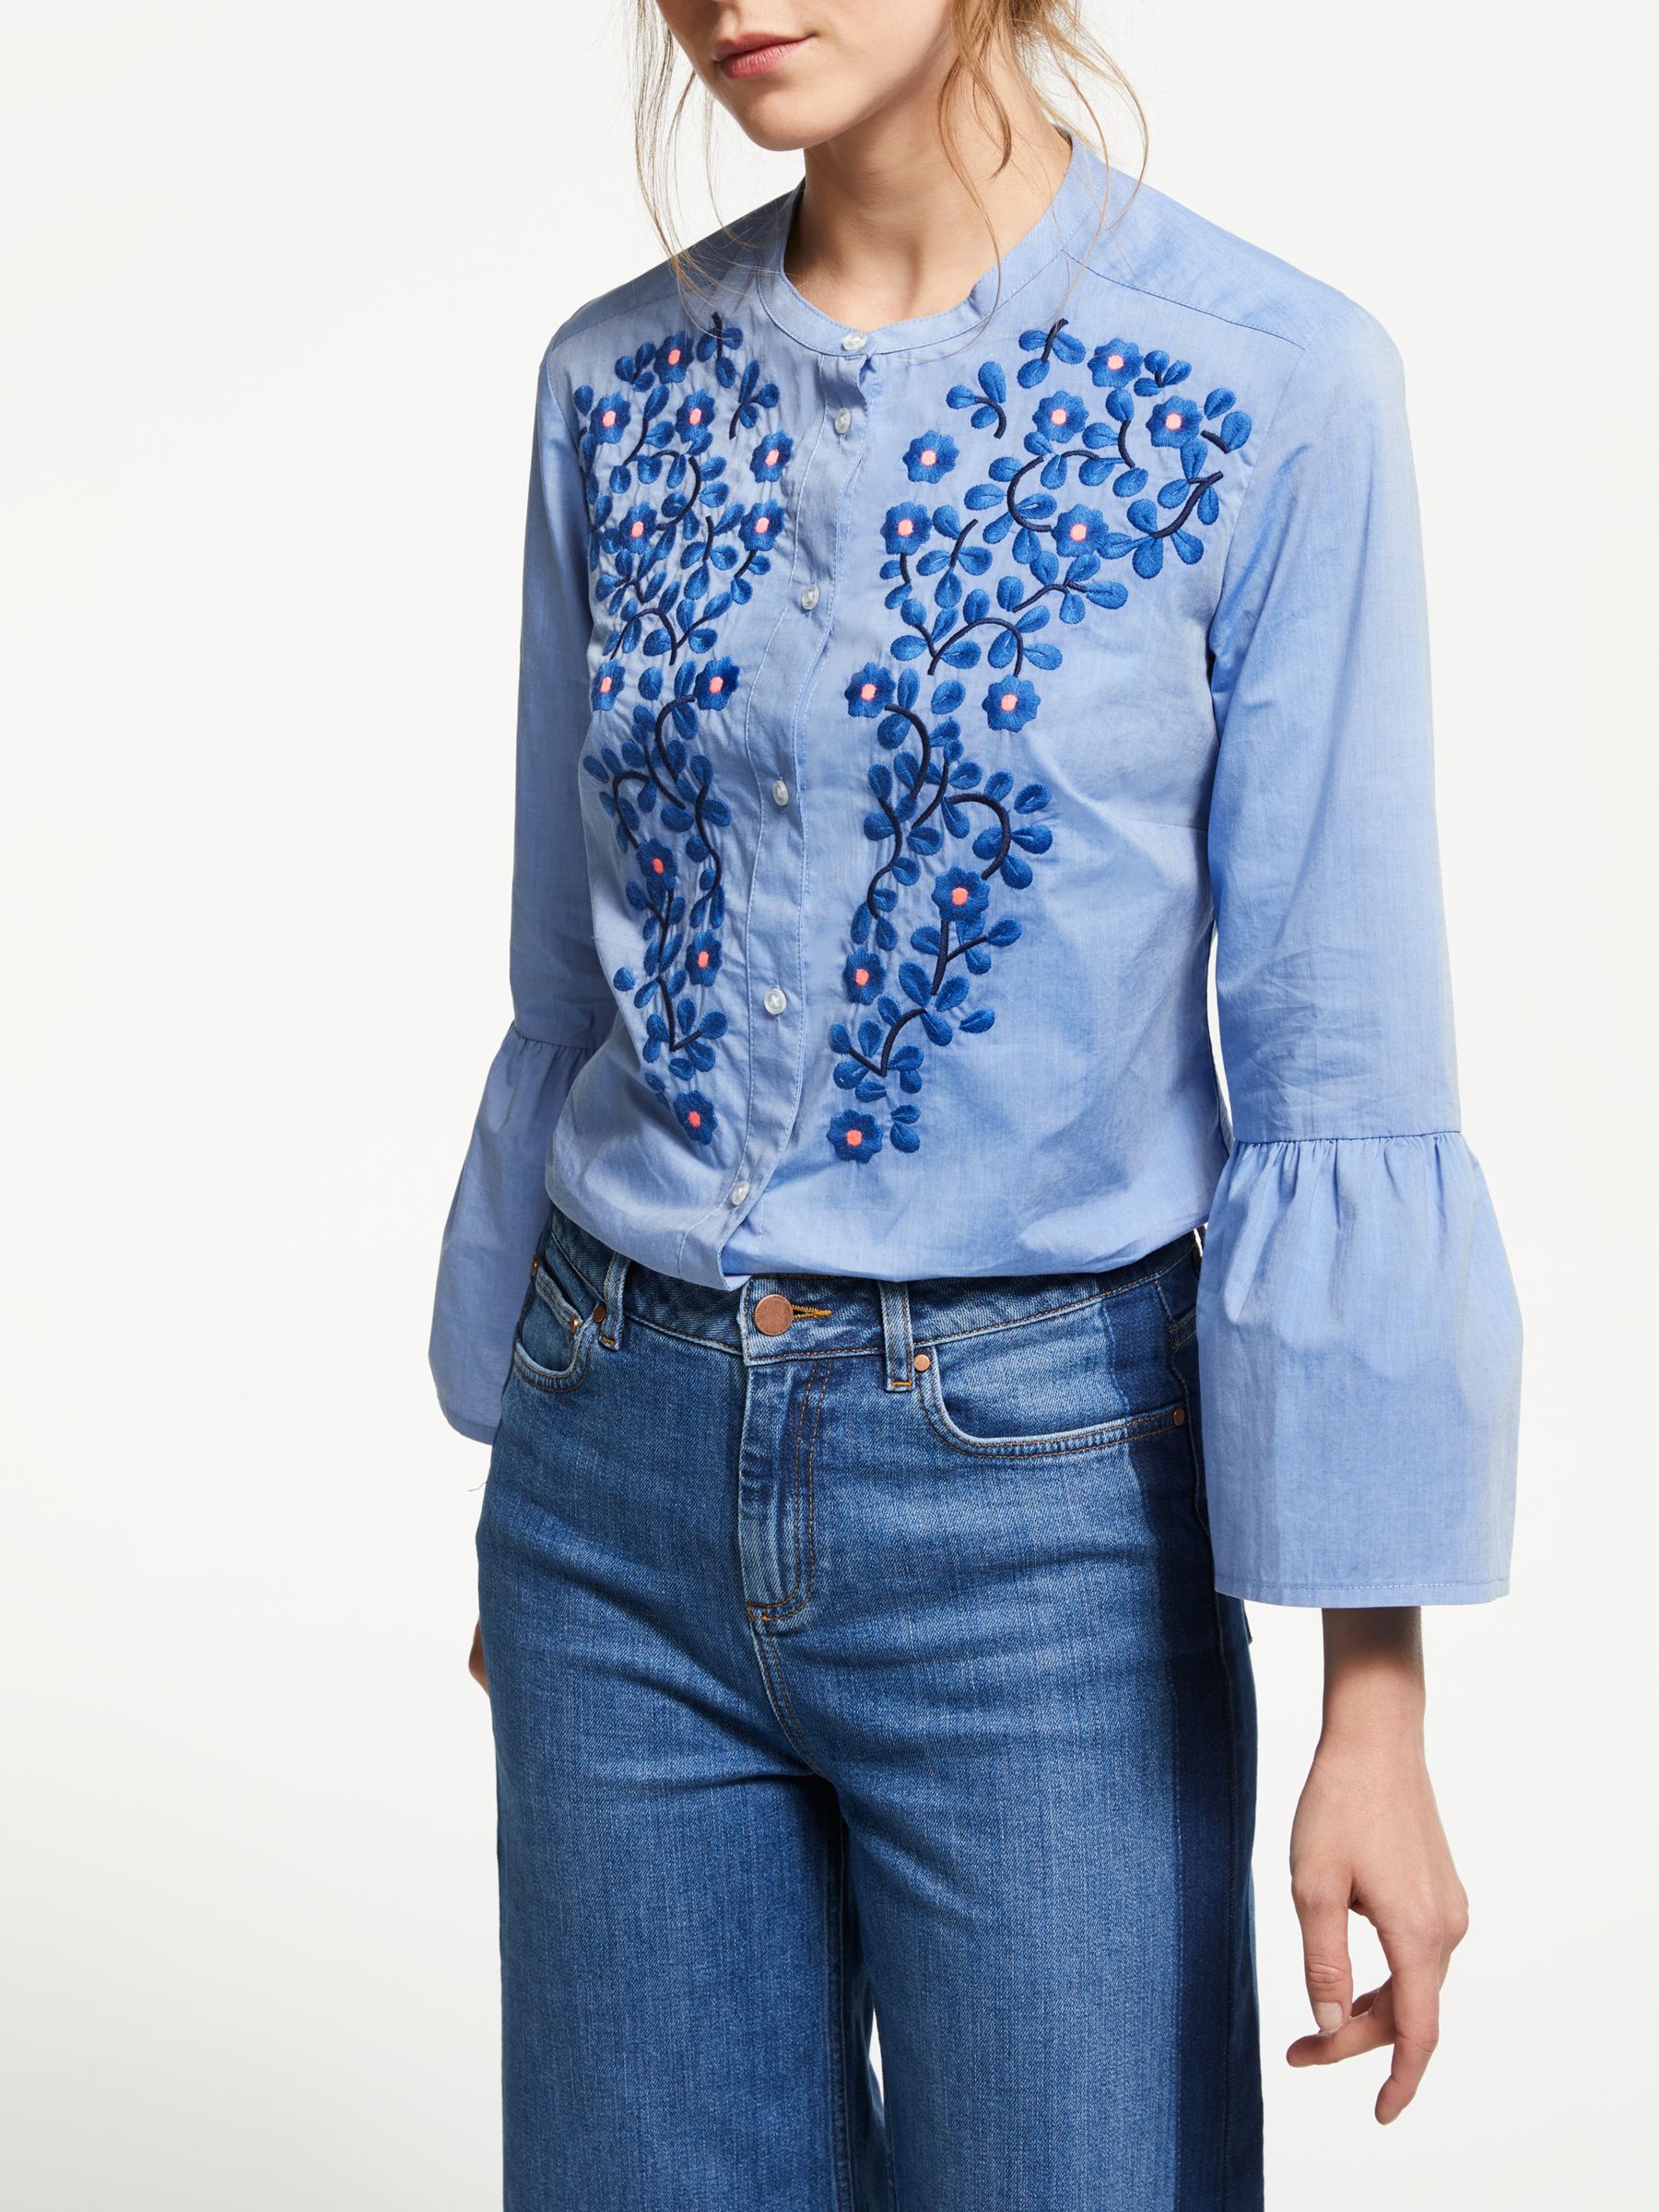 Boden Embroidered Bell Sleeve Shirt